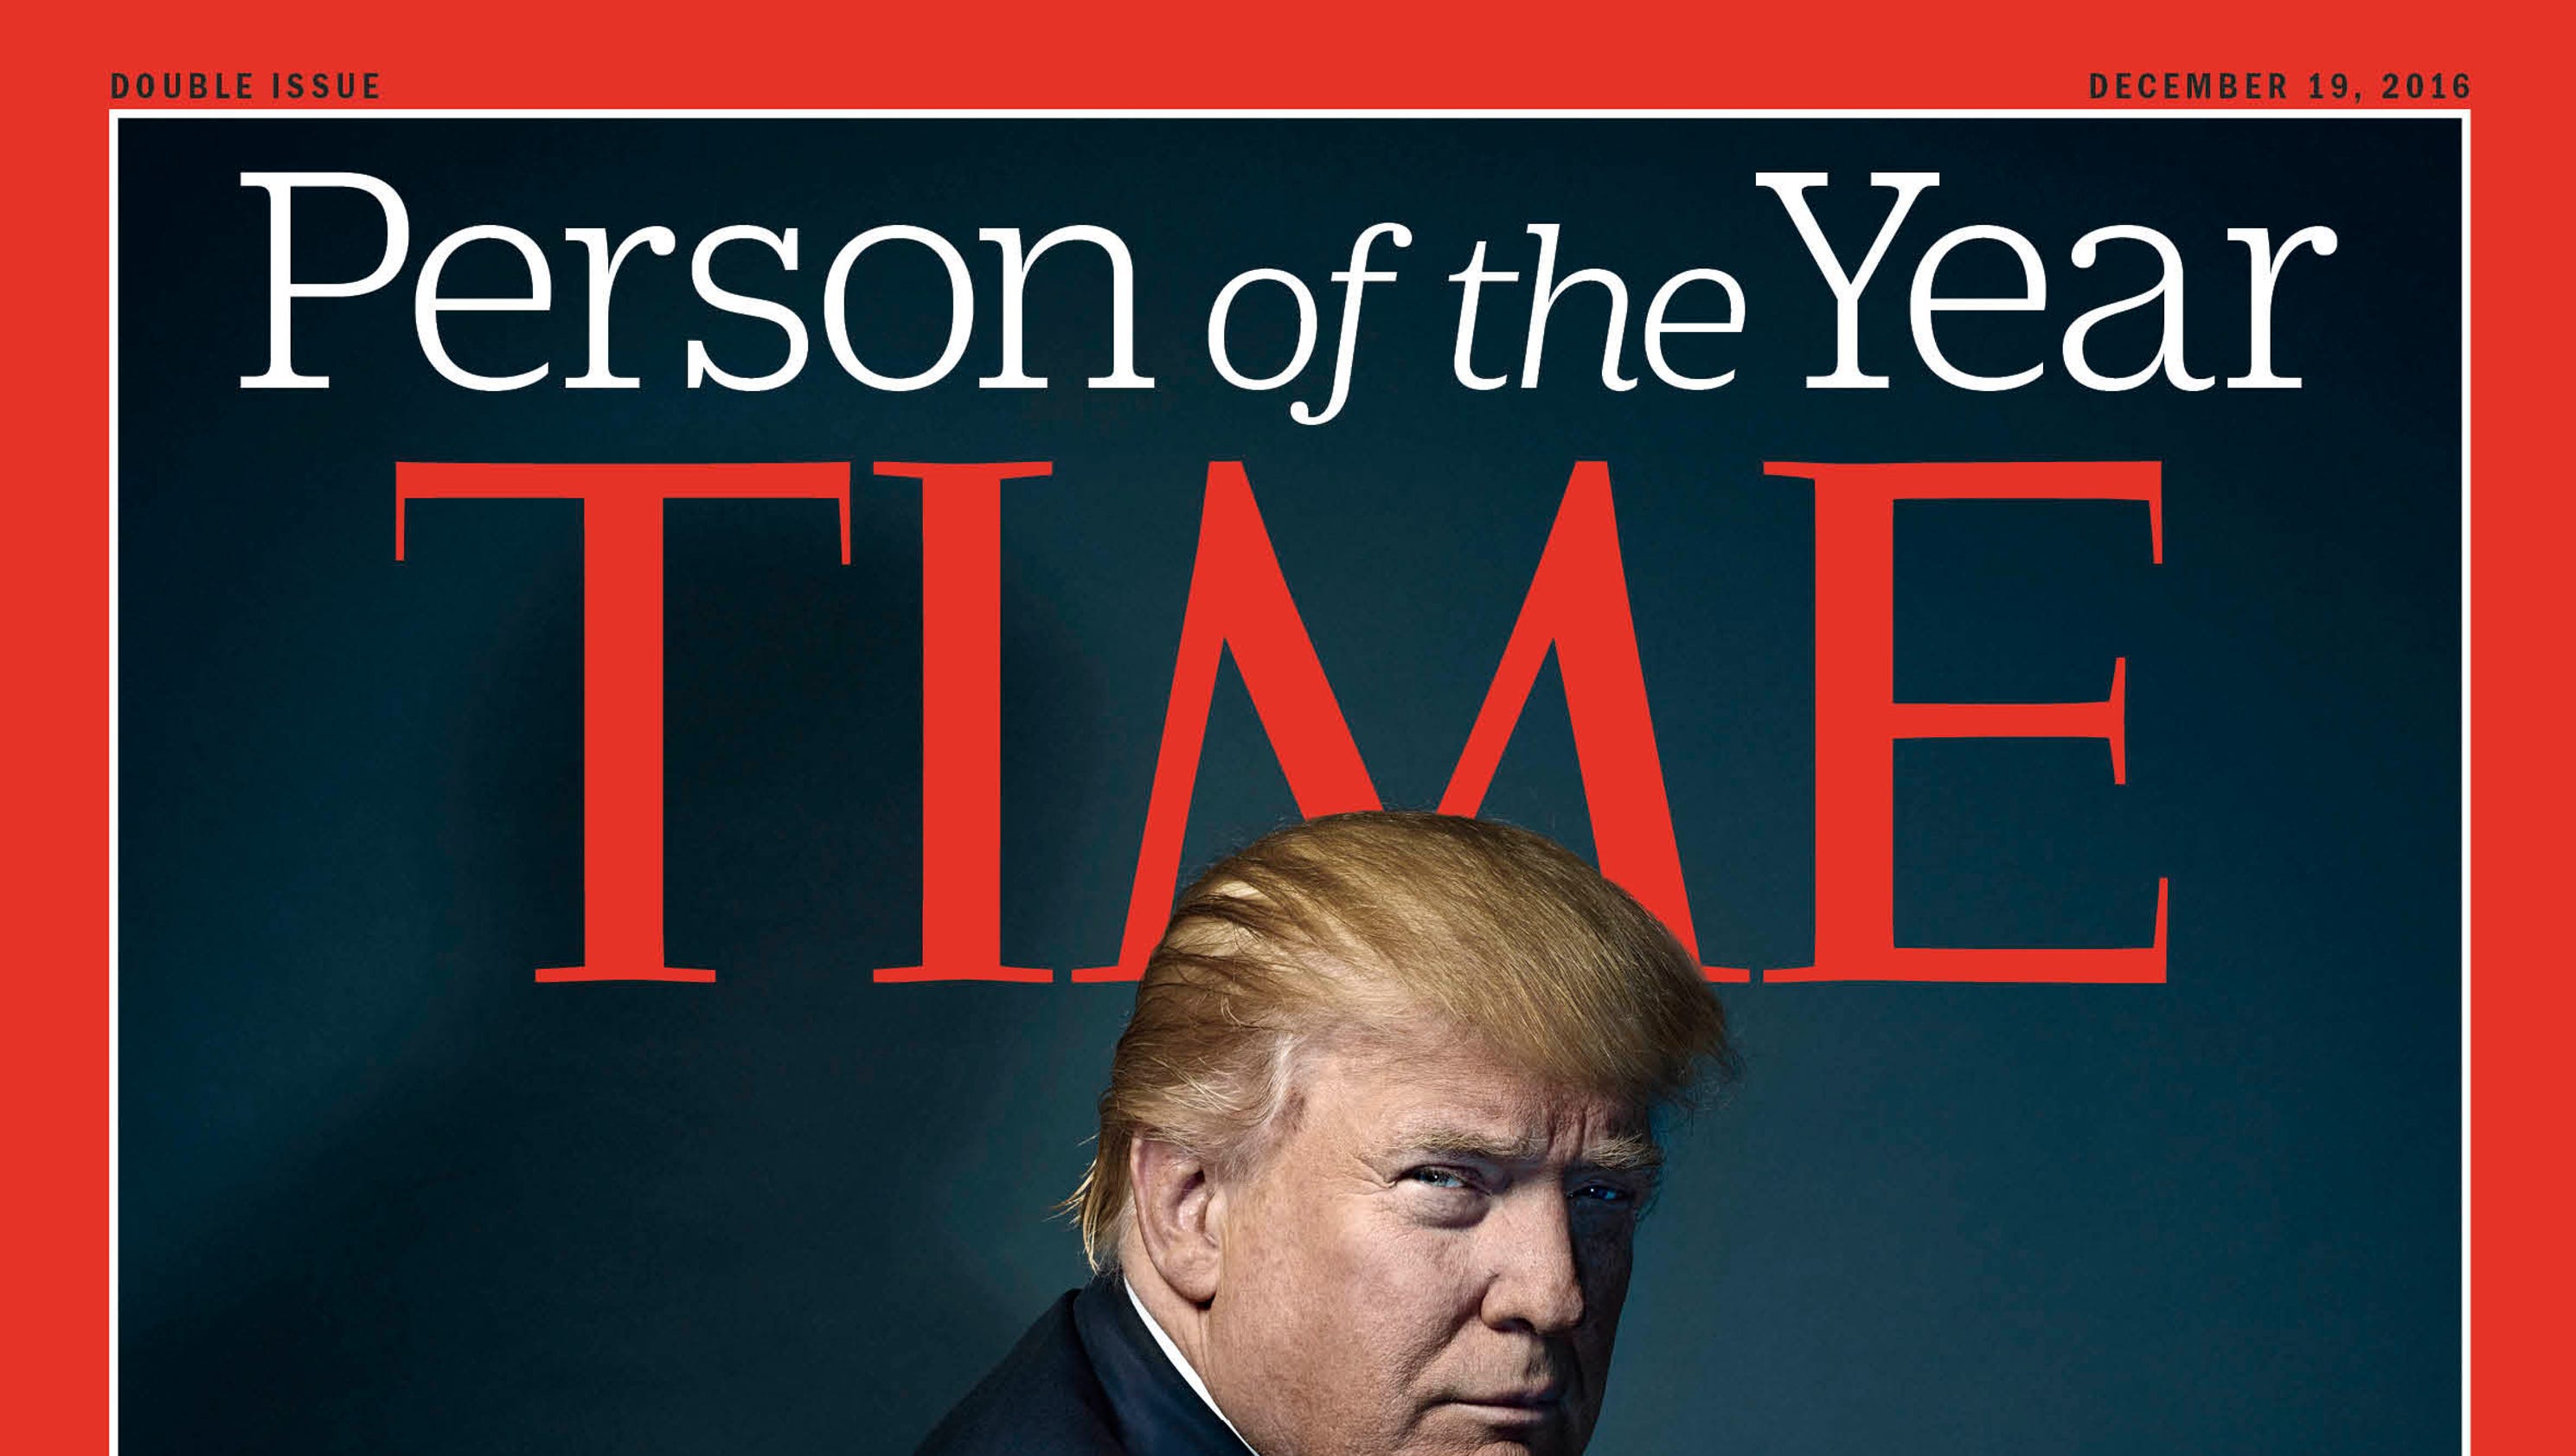 'Time' magazine's Person of the Year covers